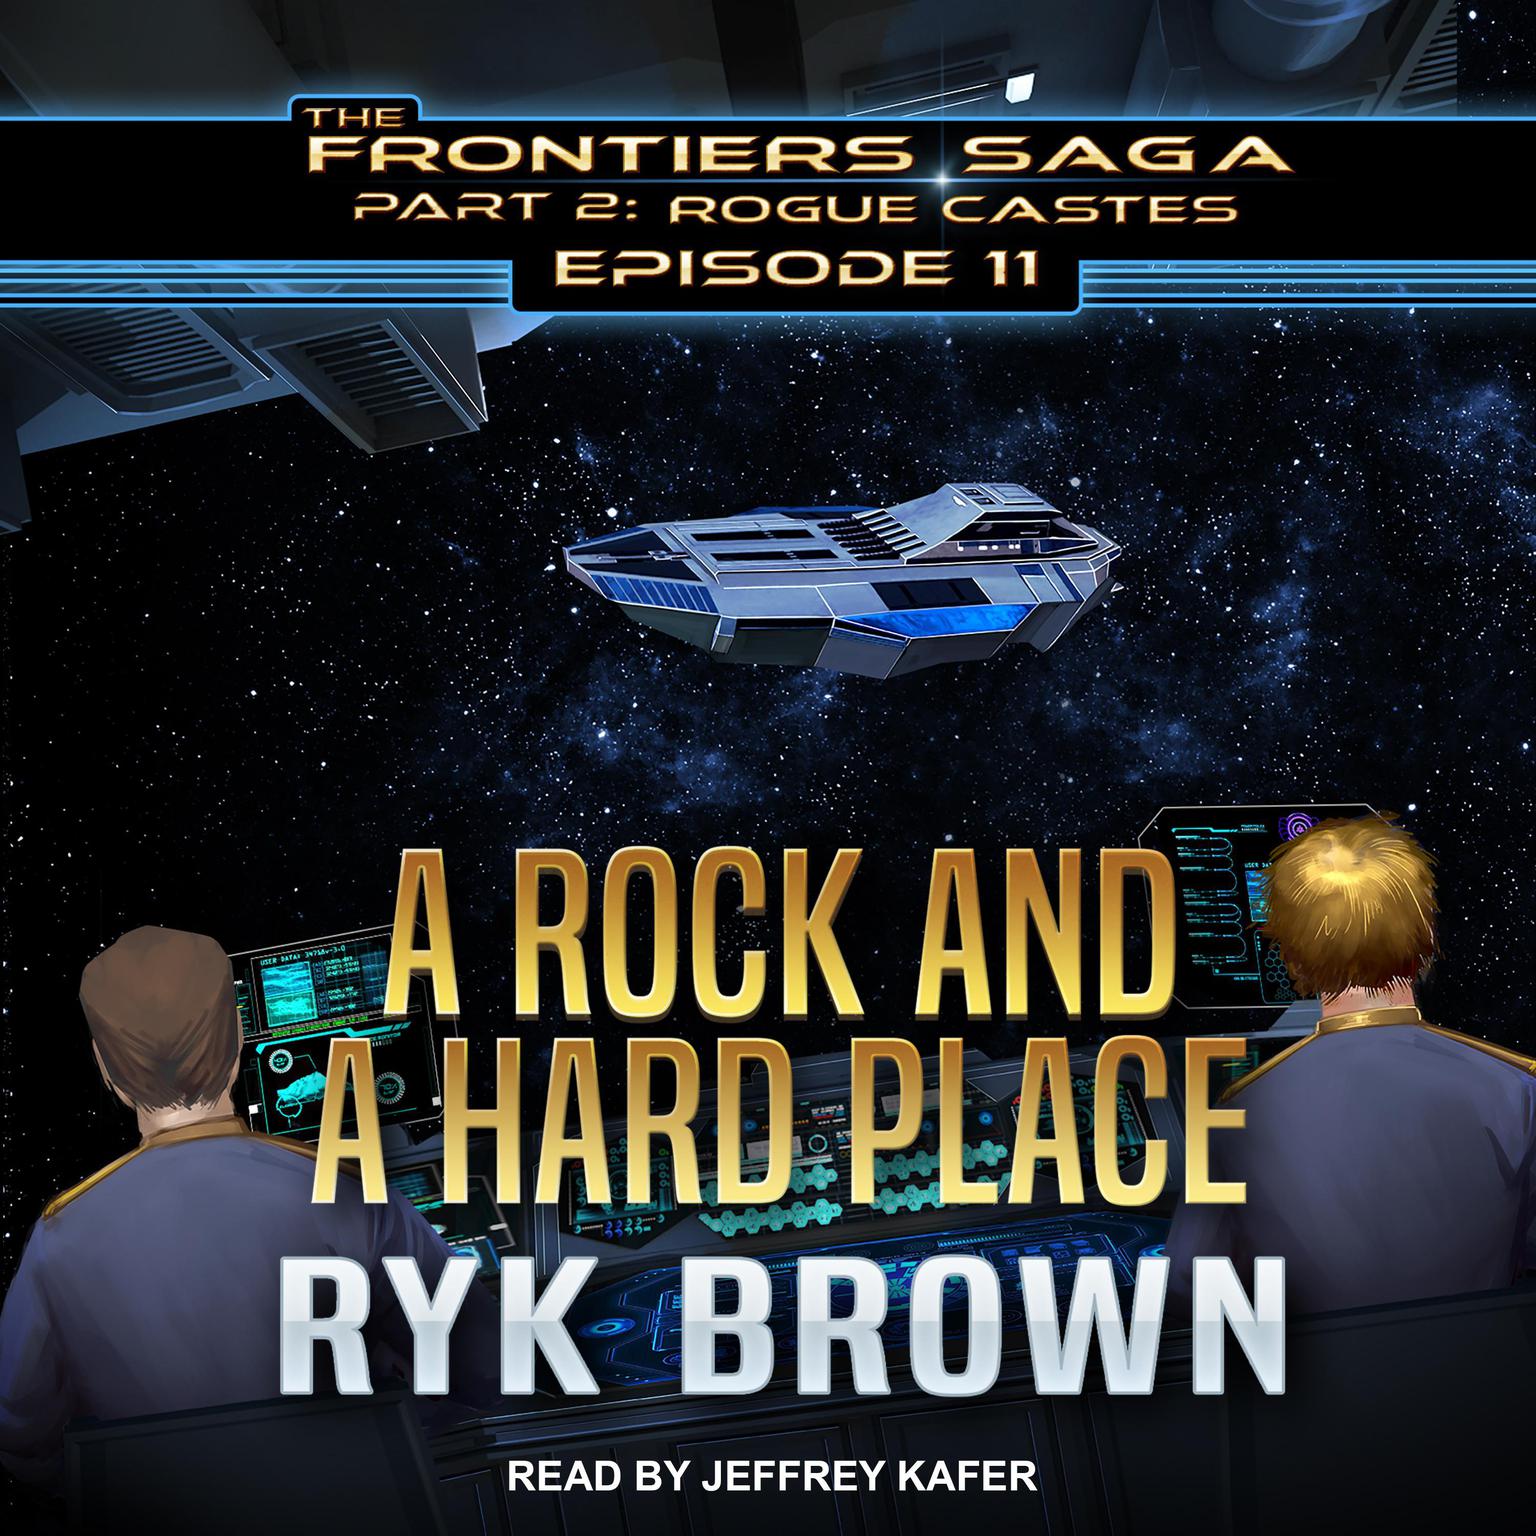 A Rock and a Hard Place Audiobook, by Ryk Brown